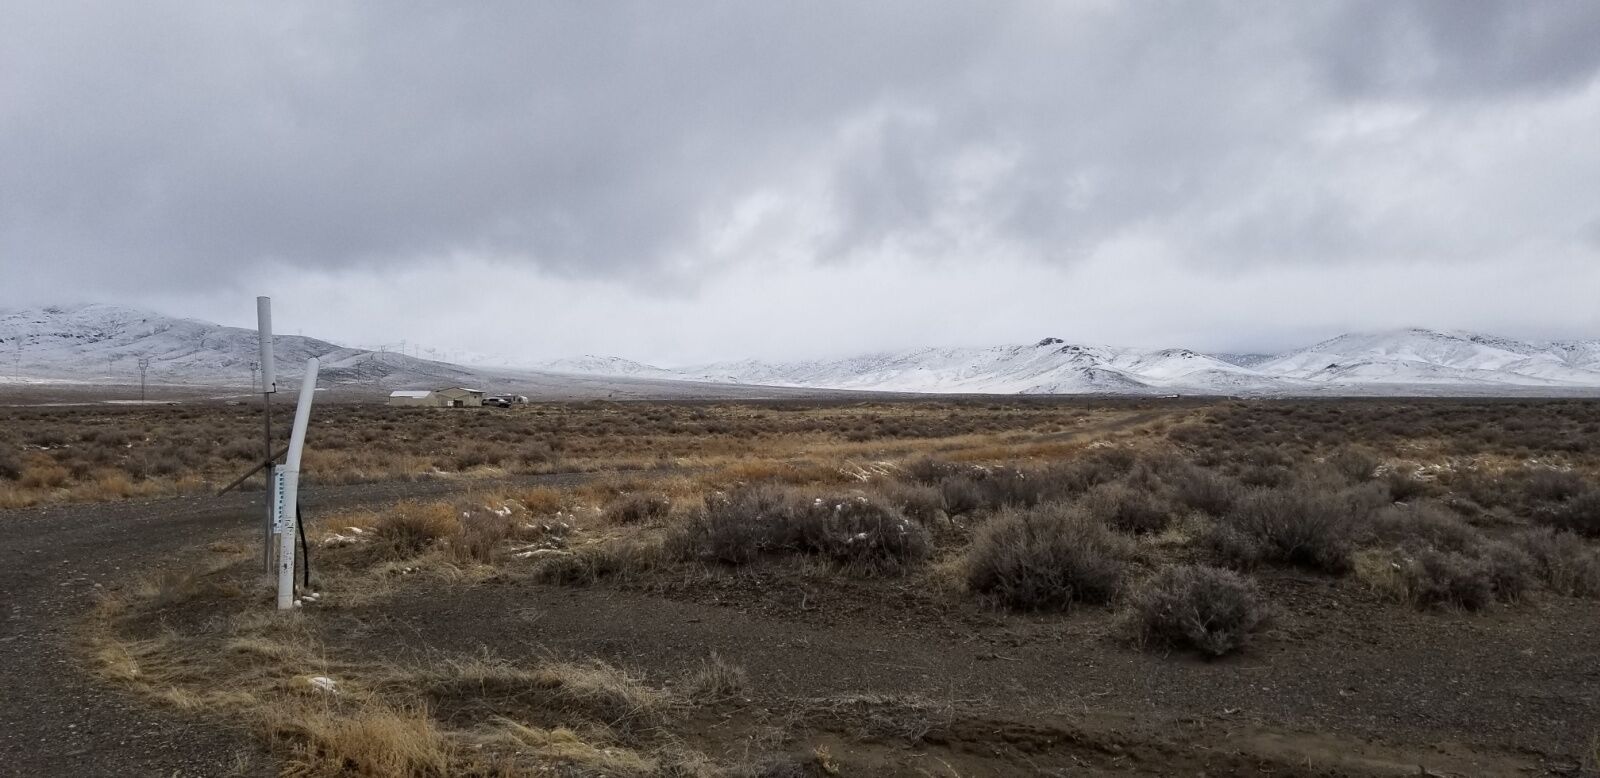 kyle hot springs in nevada with snow on mountains in back 